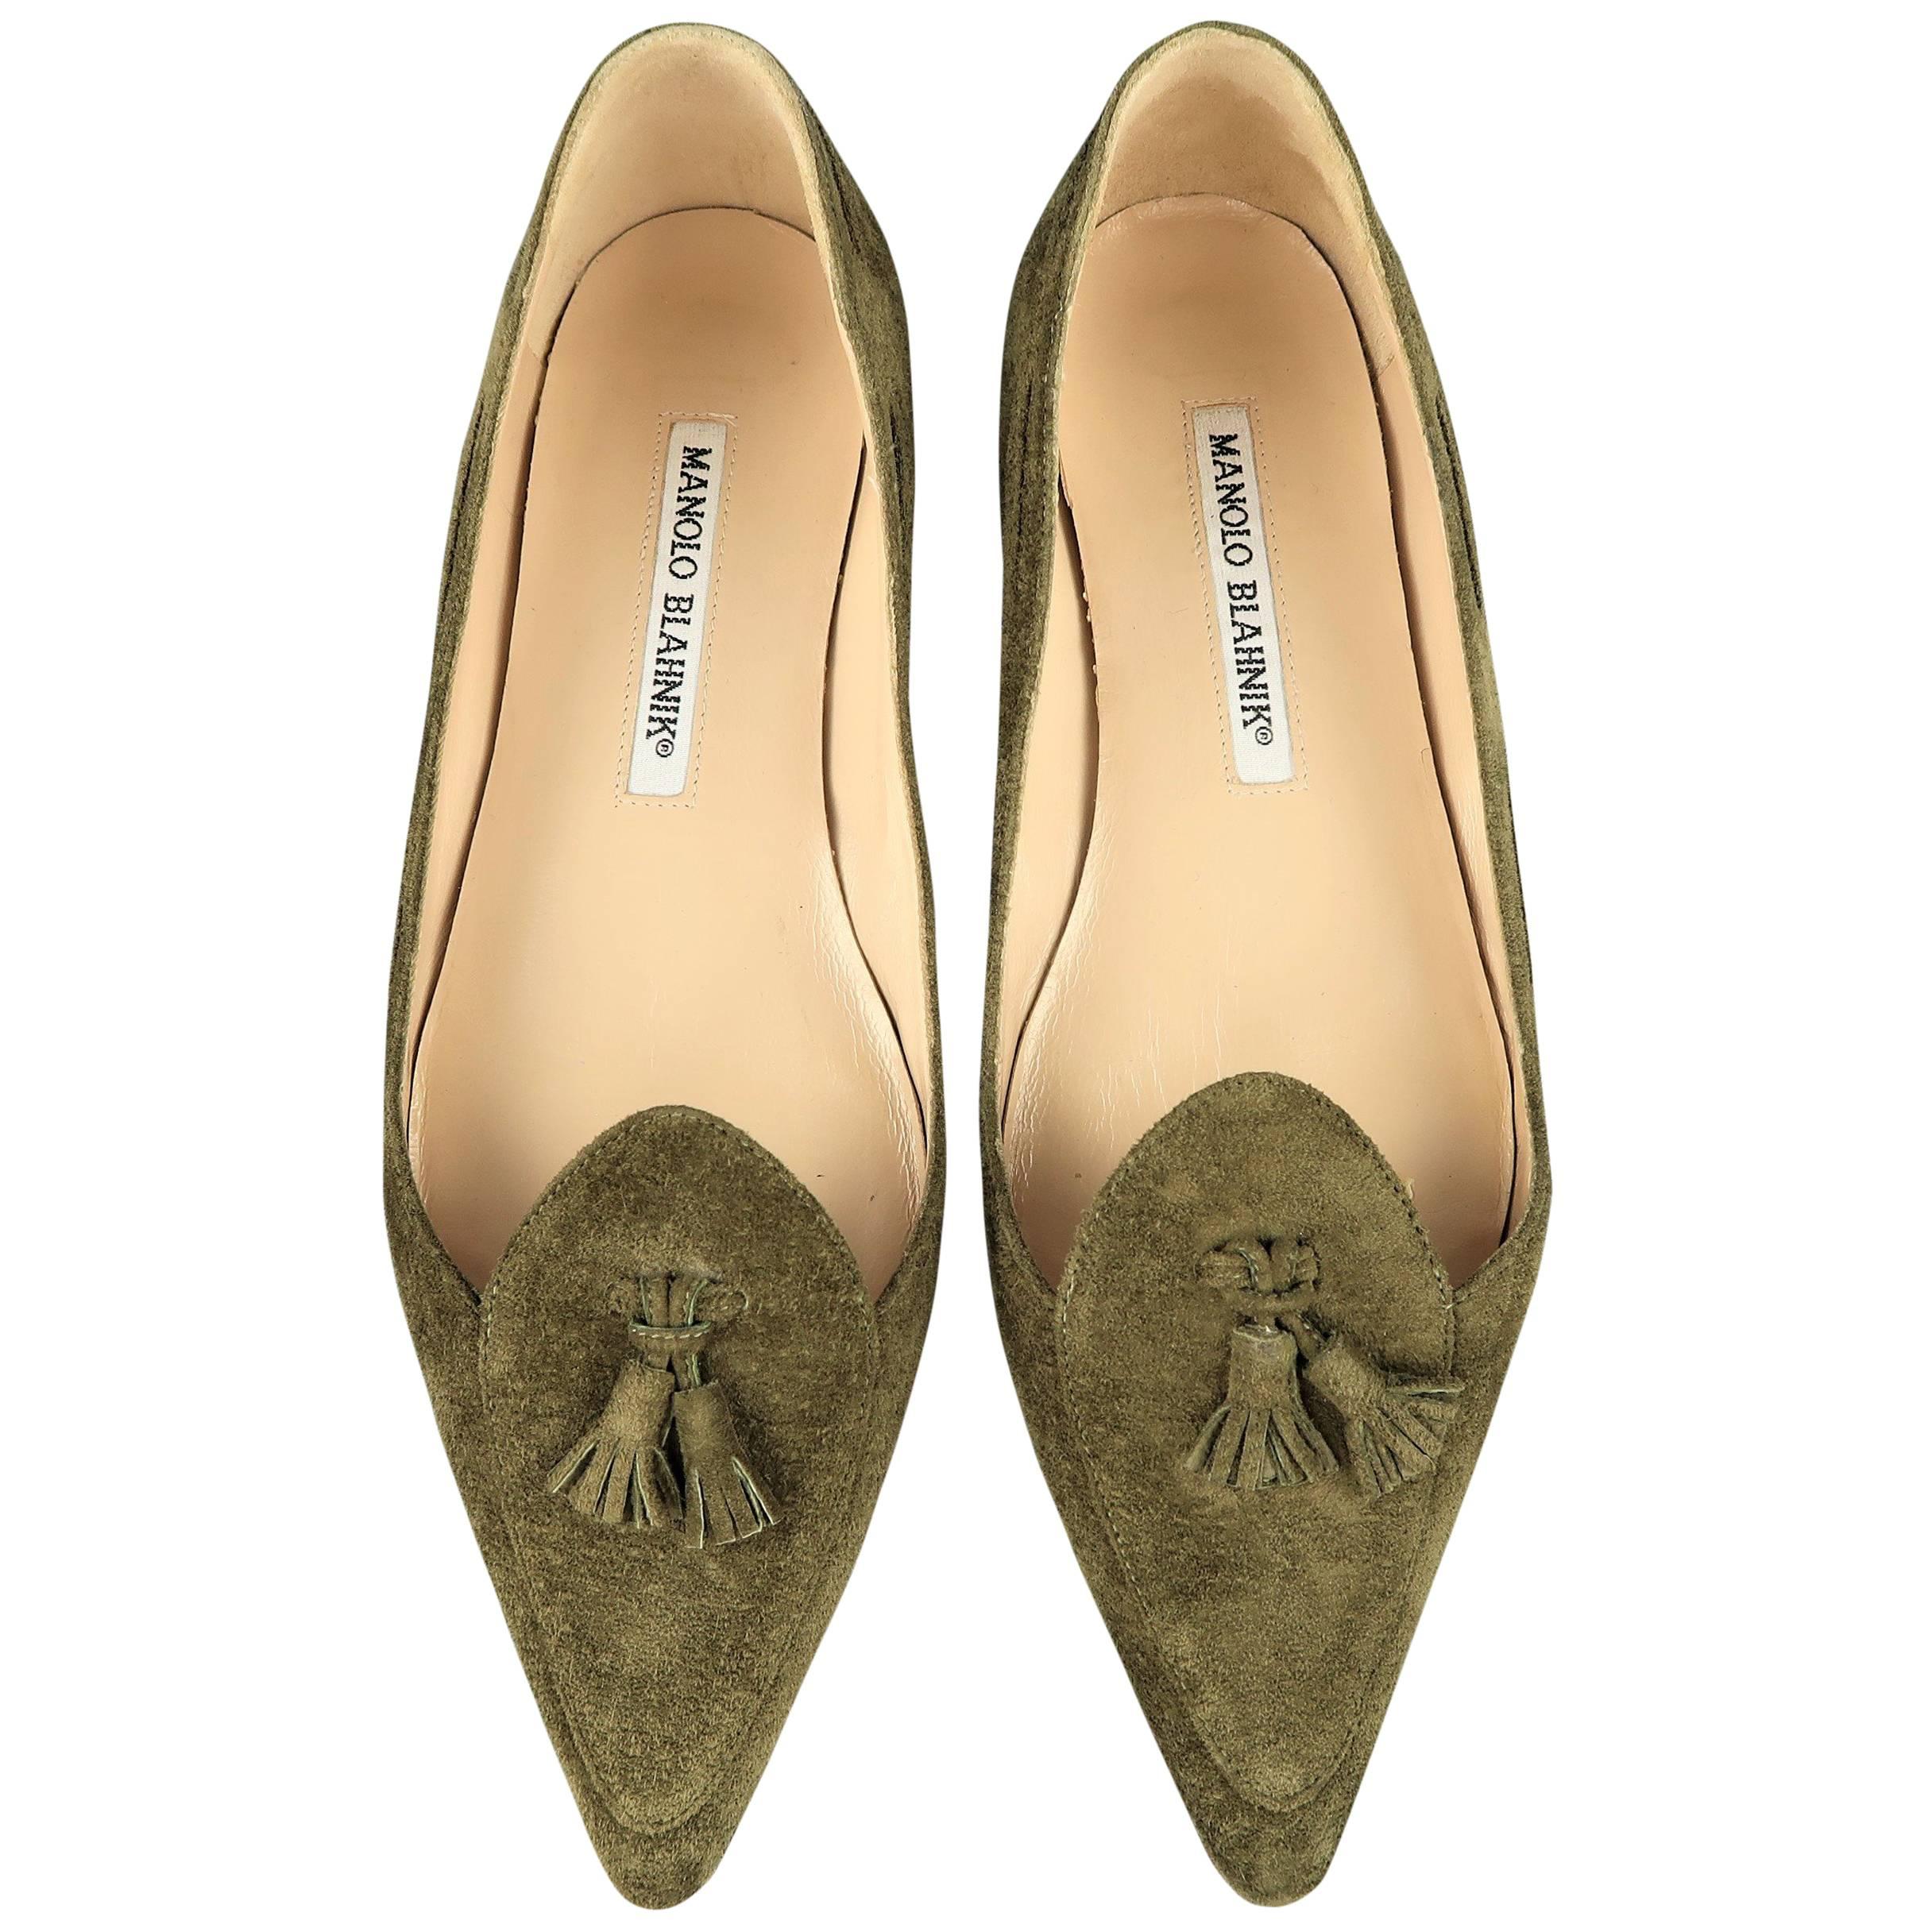 MANOLO BLAHNIK Flats - Size 5 Olive Green Suede Pointed Tassels Loafer Shoes